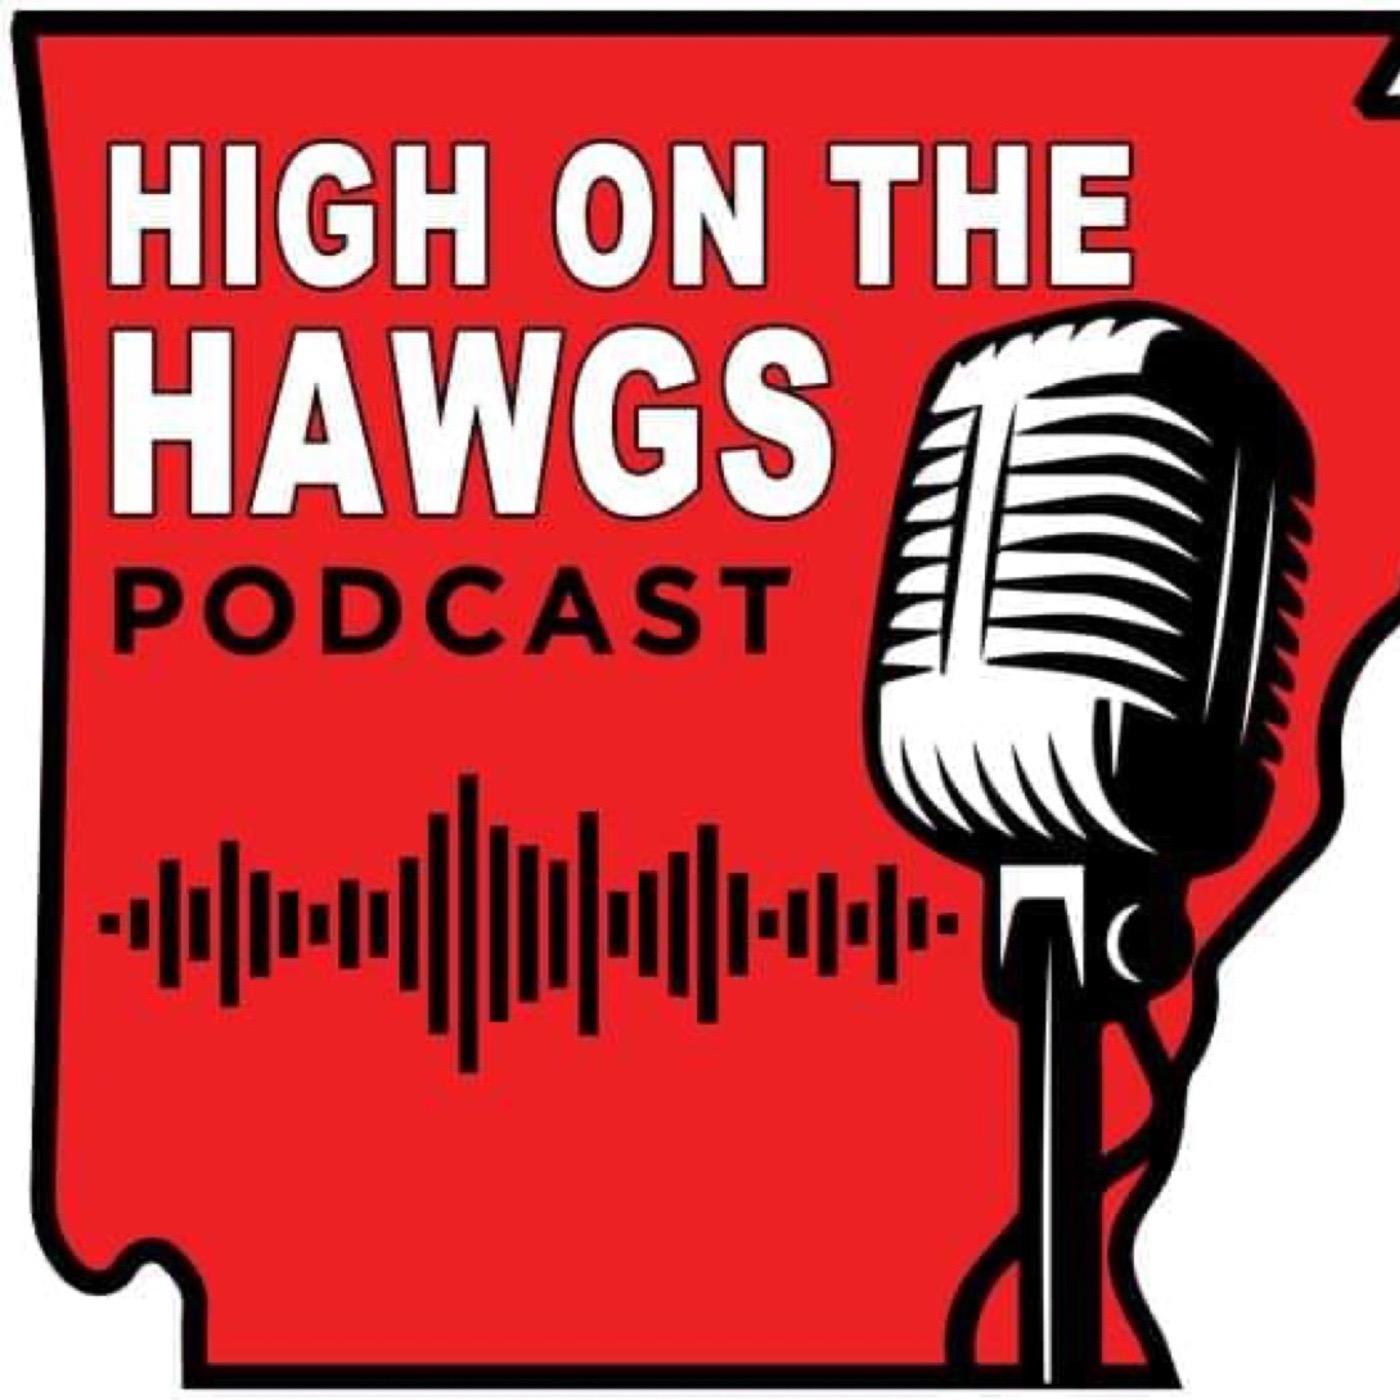 High on the Hawgs Podcast